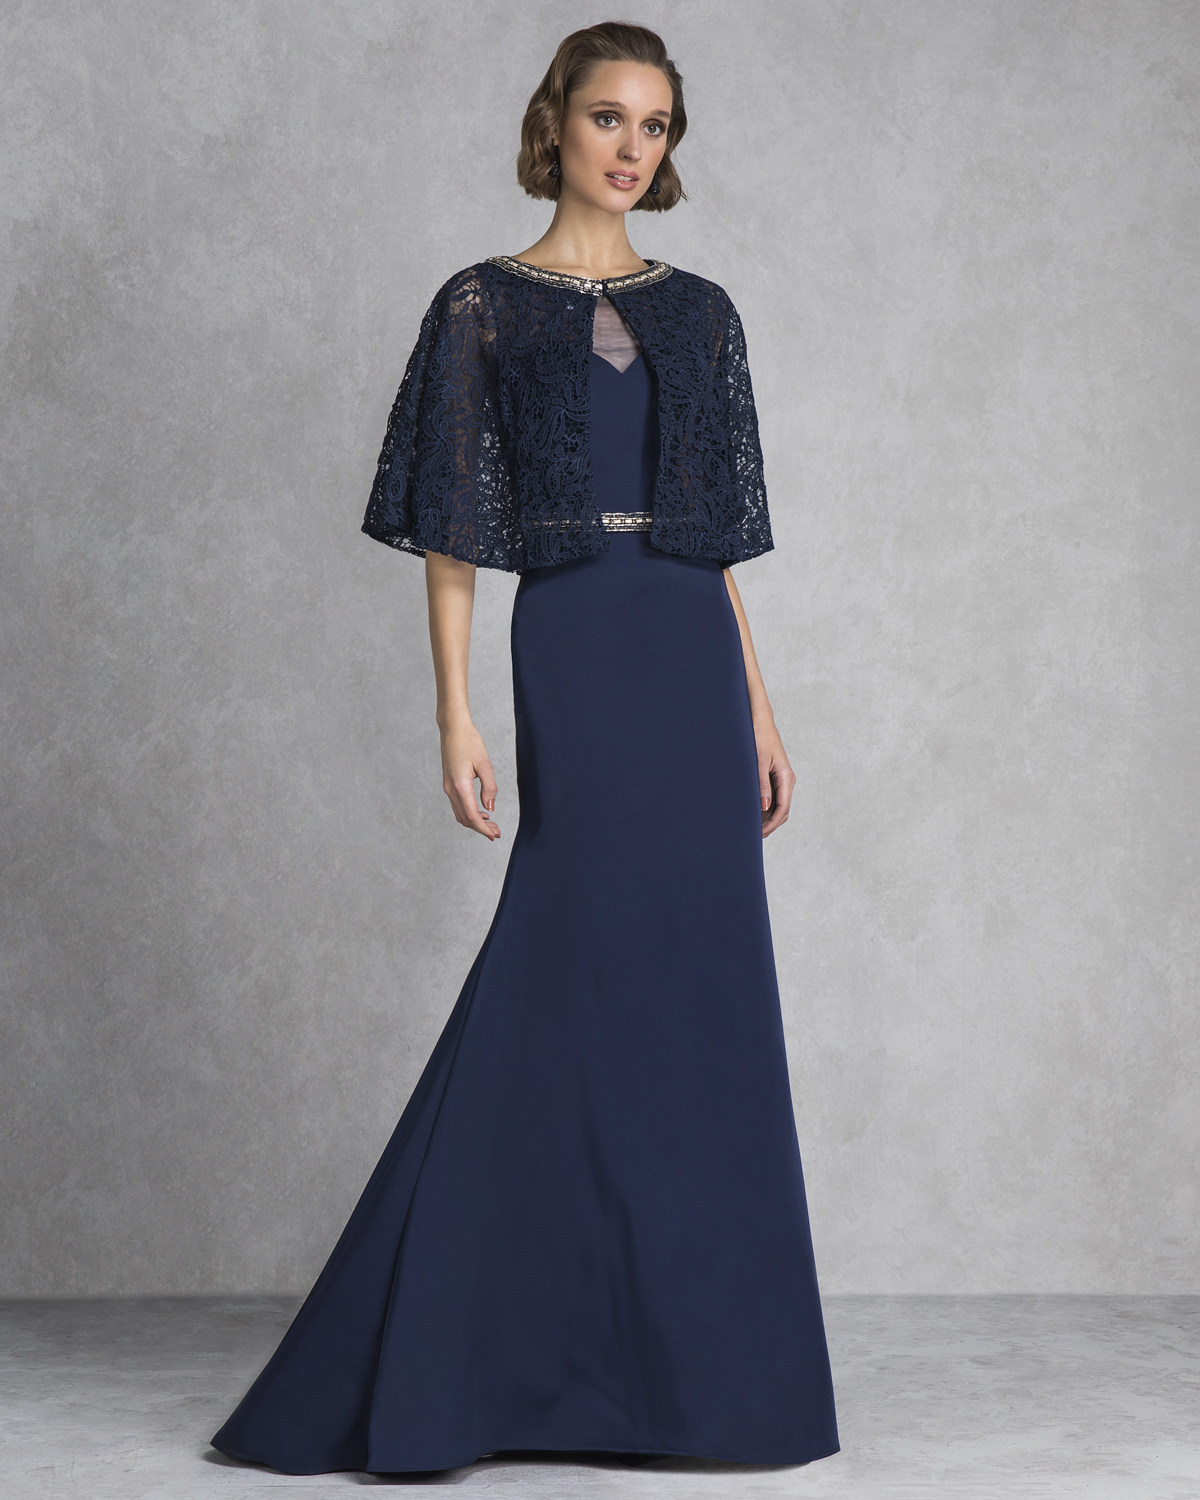 Classic Dresses / Long evening dress with beaded belt and bolero with lace